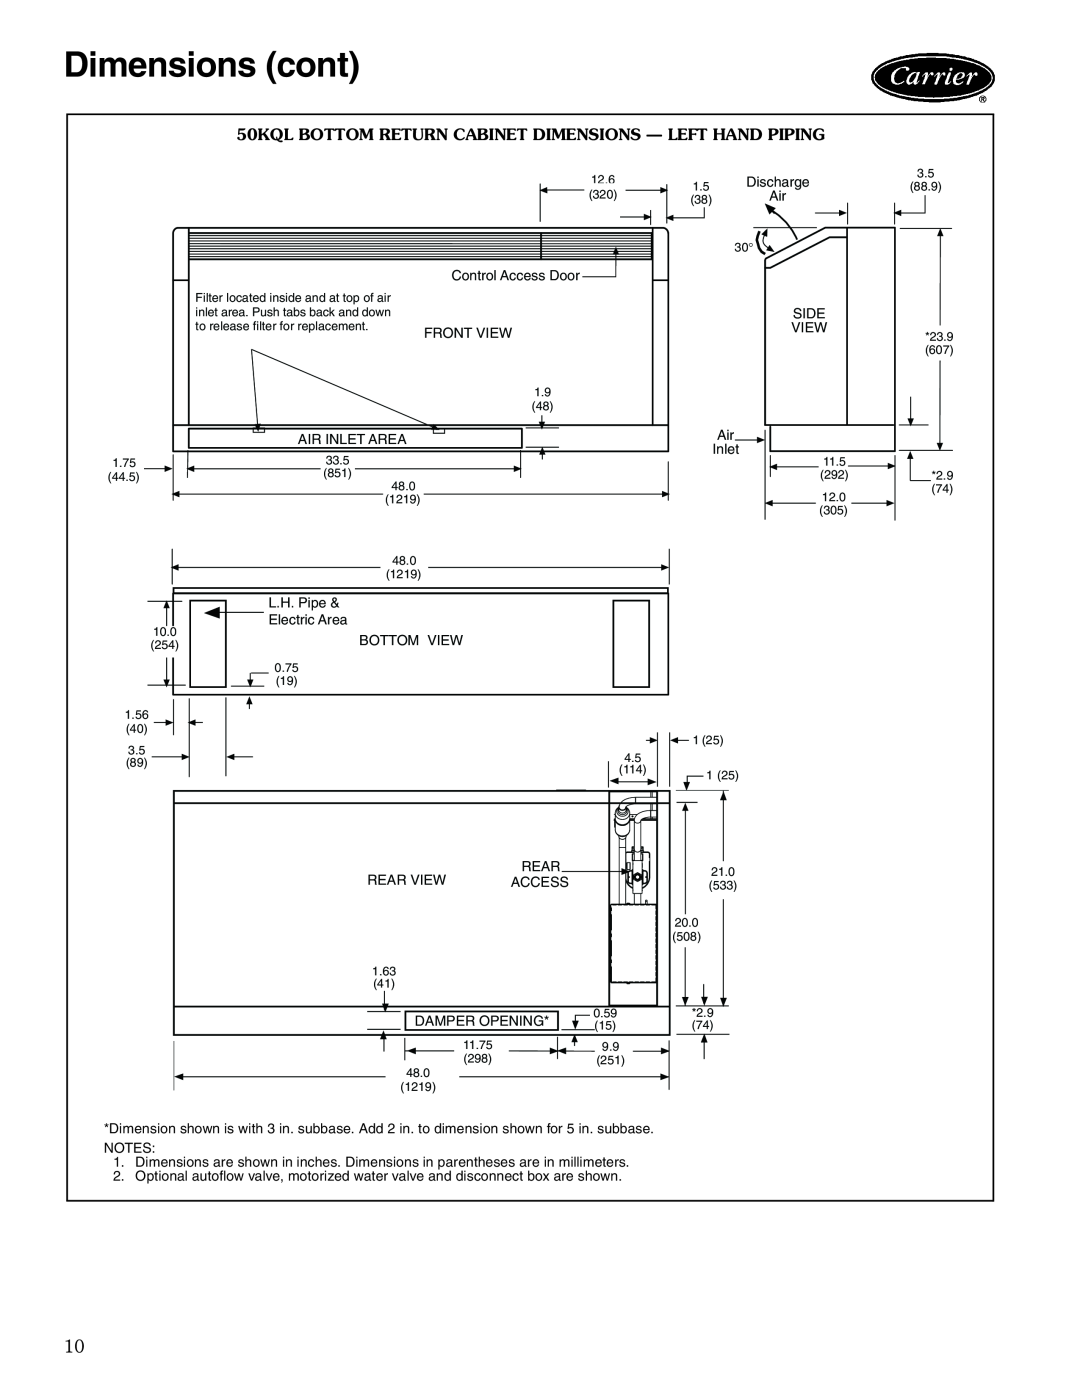 Carrier 50KQL-1PD manual Dimensions cont, 50KQL BOTTOM RETURN CABINET DIMENSIONS - LEFT HAND PIPING 